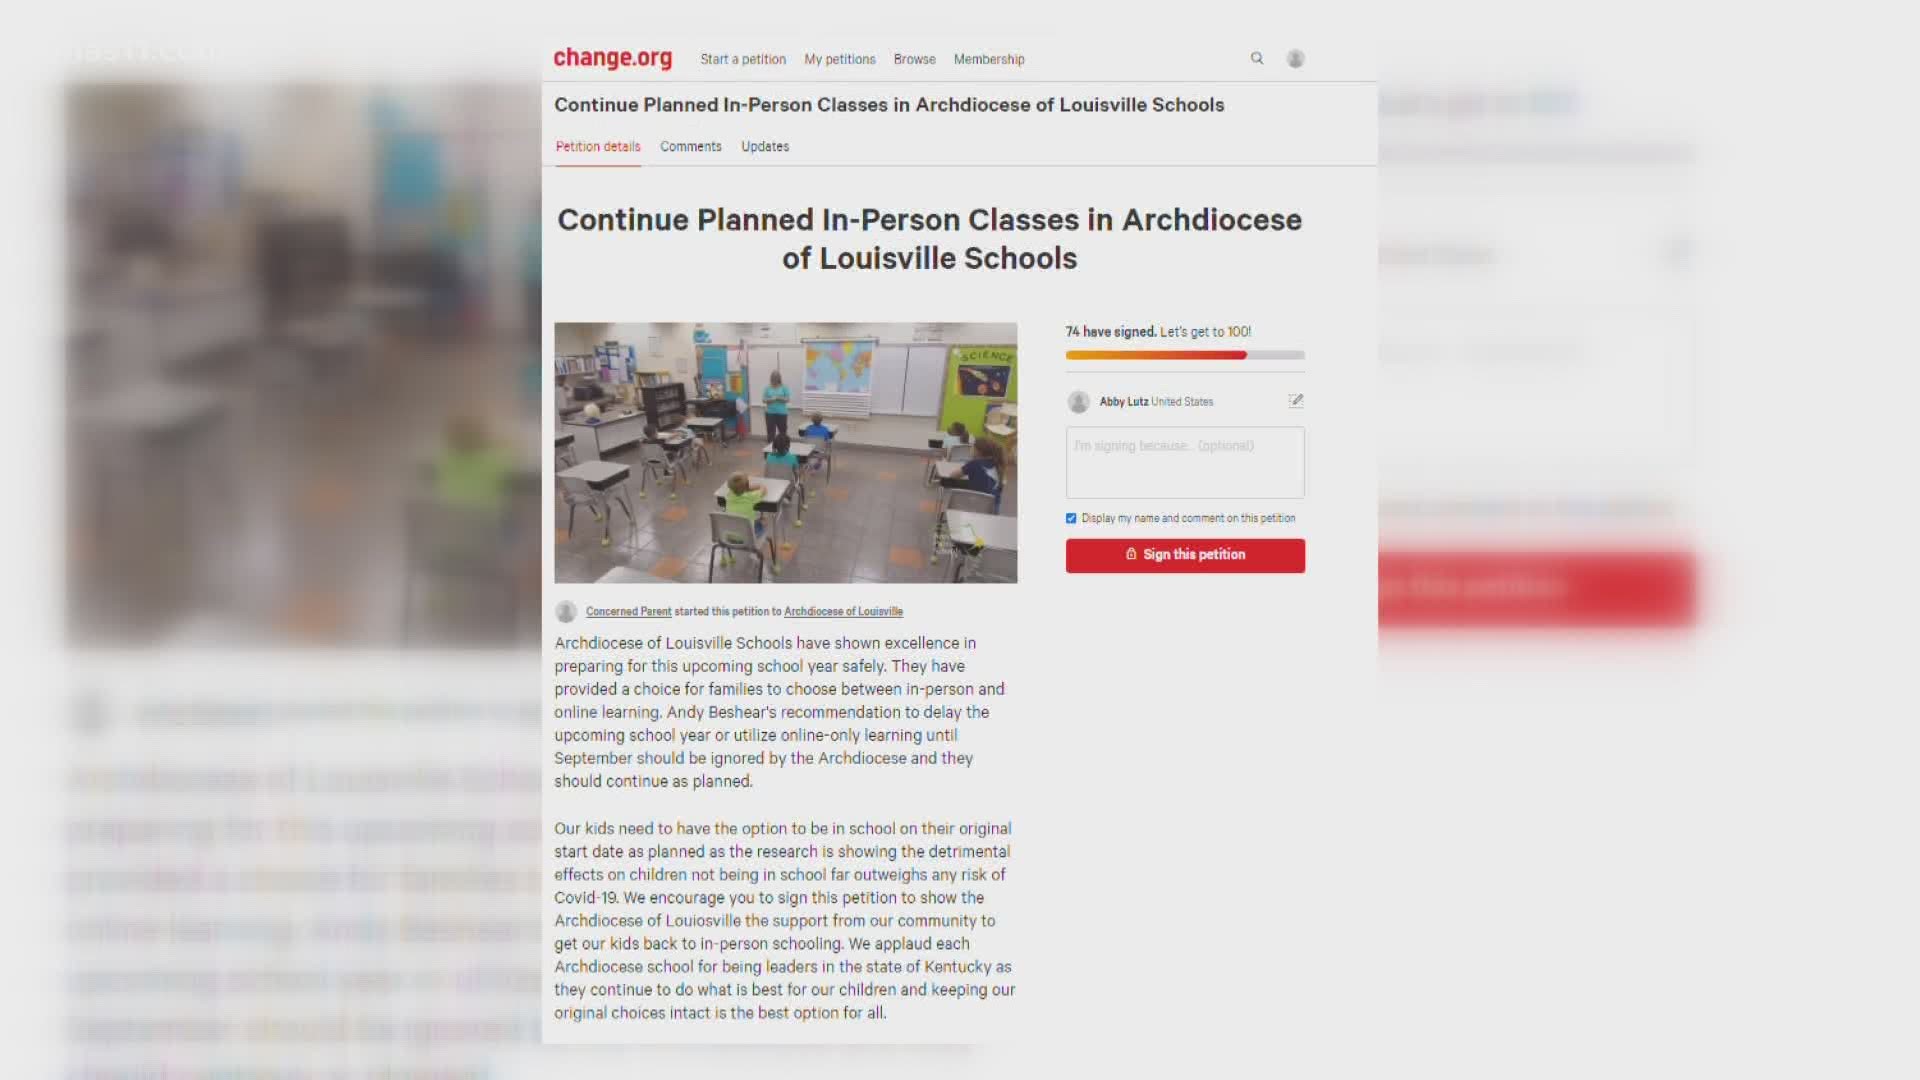 The petition praises the archdiocese for their reaction so far in preparing for the school year